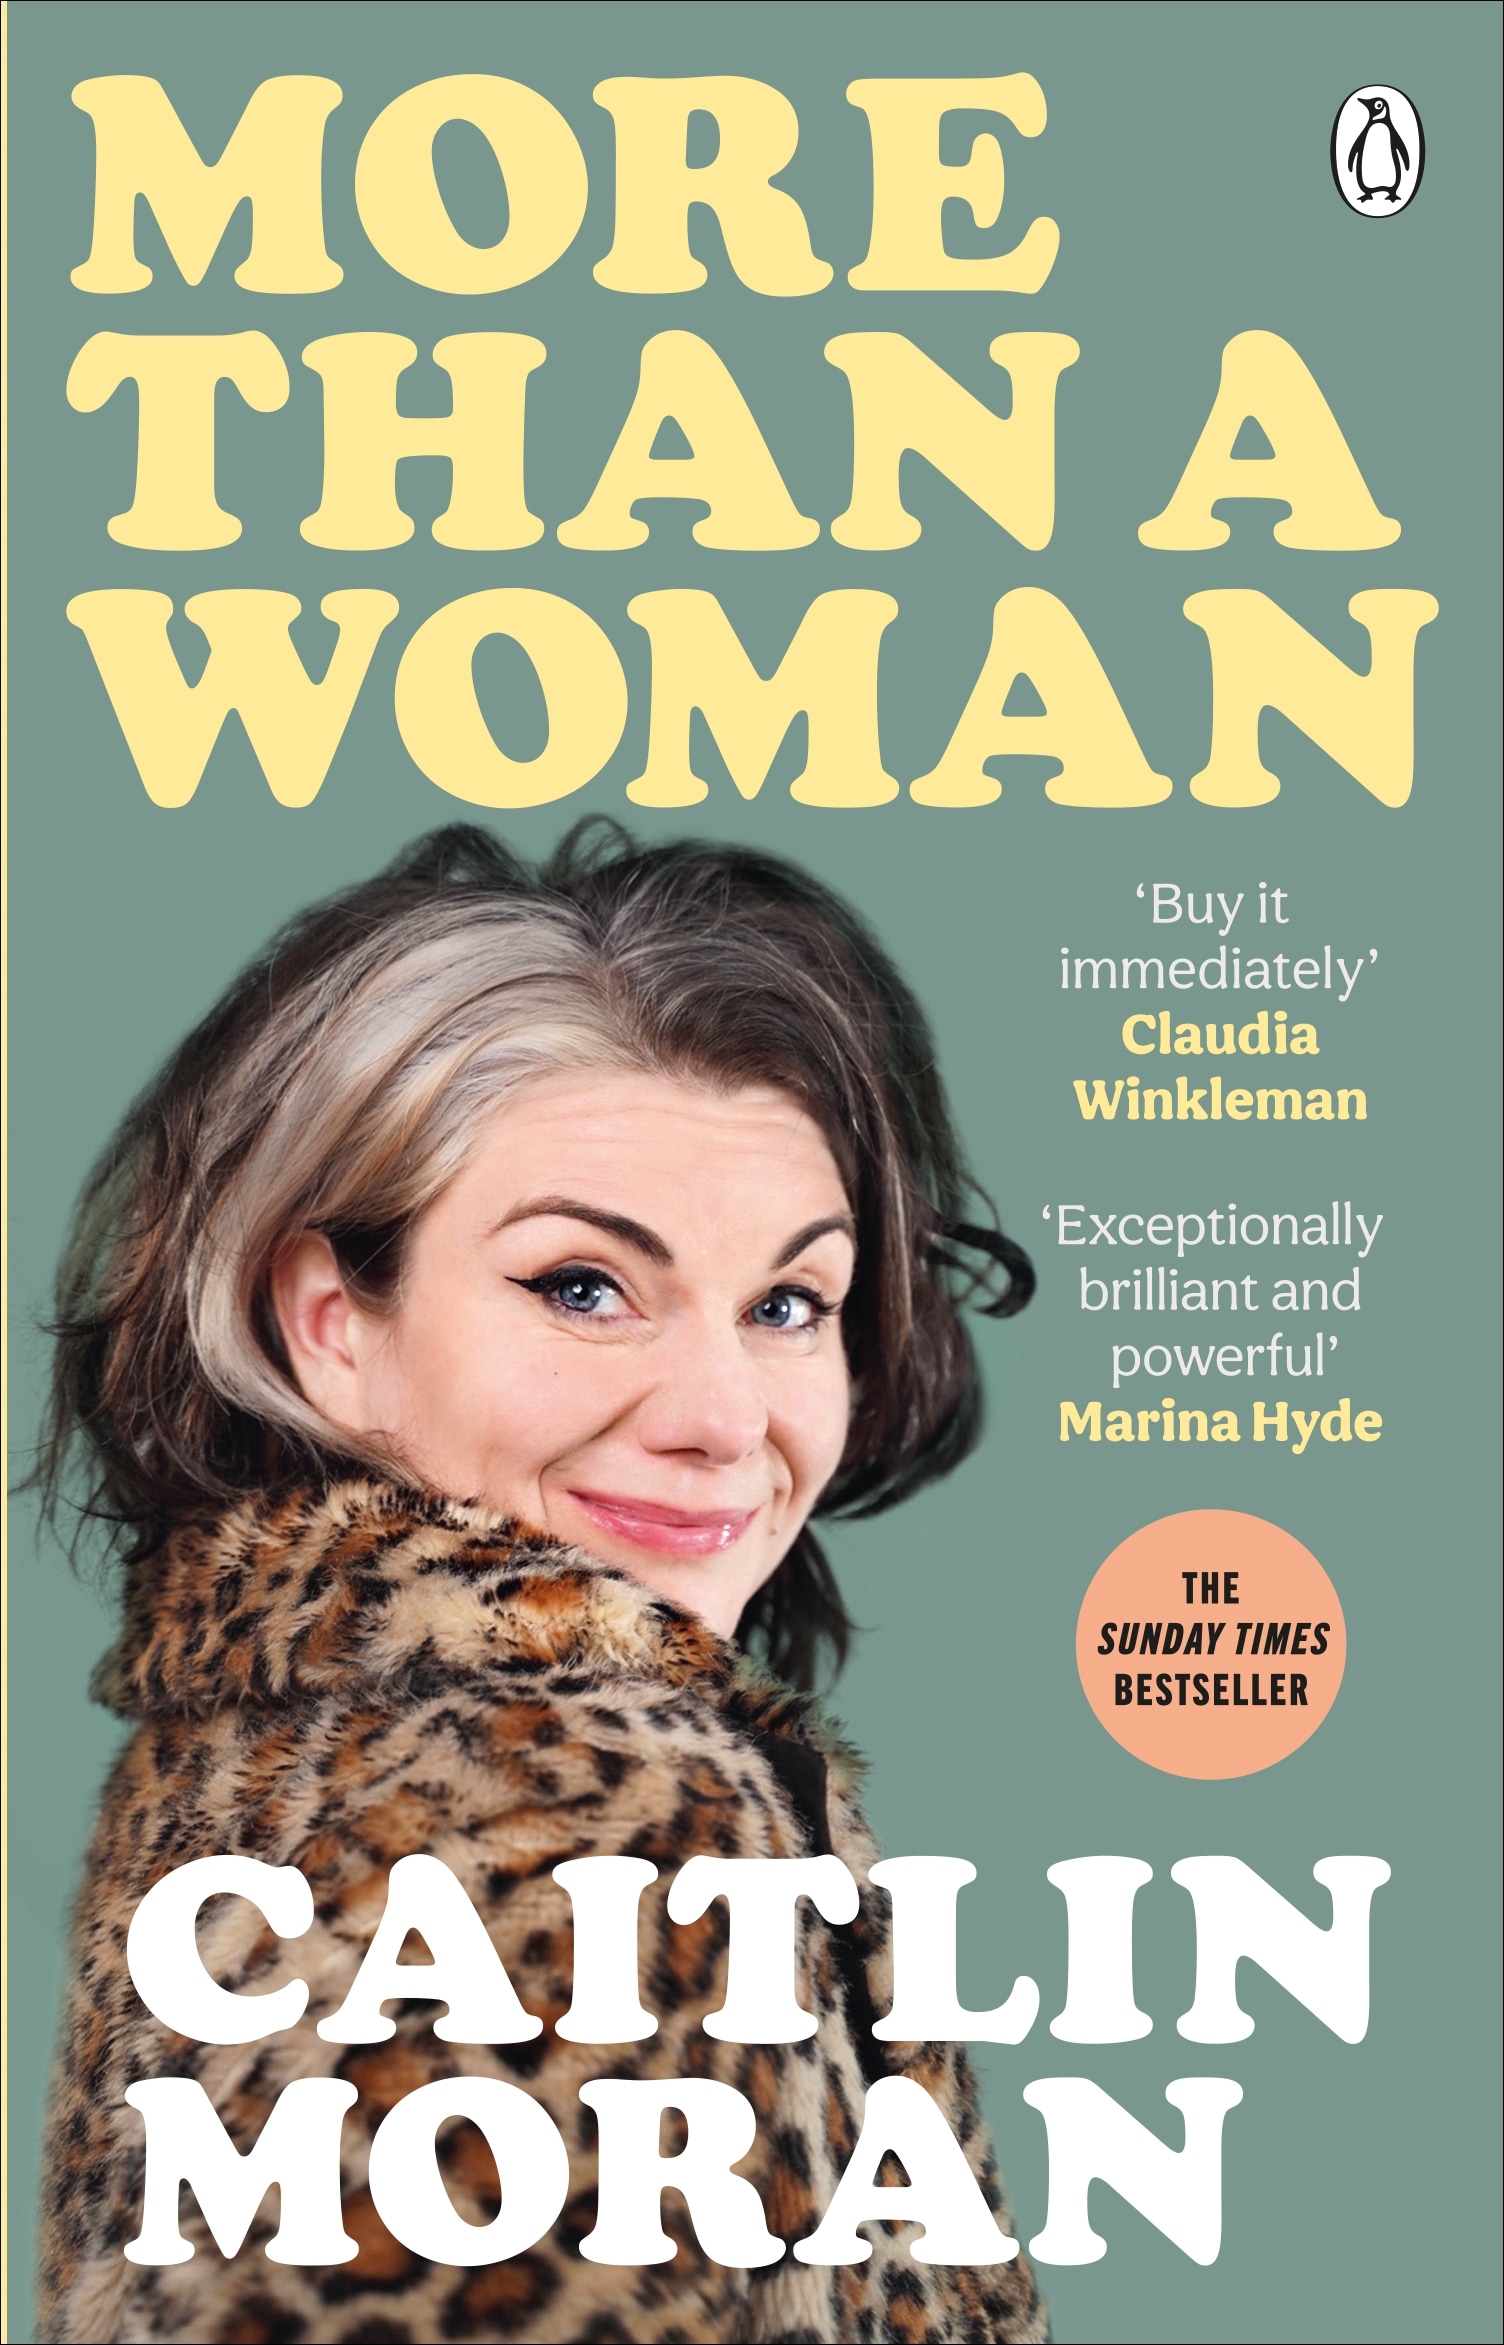 Book “More Than a Woman” by Caitlin Moran — July 8, 2021